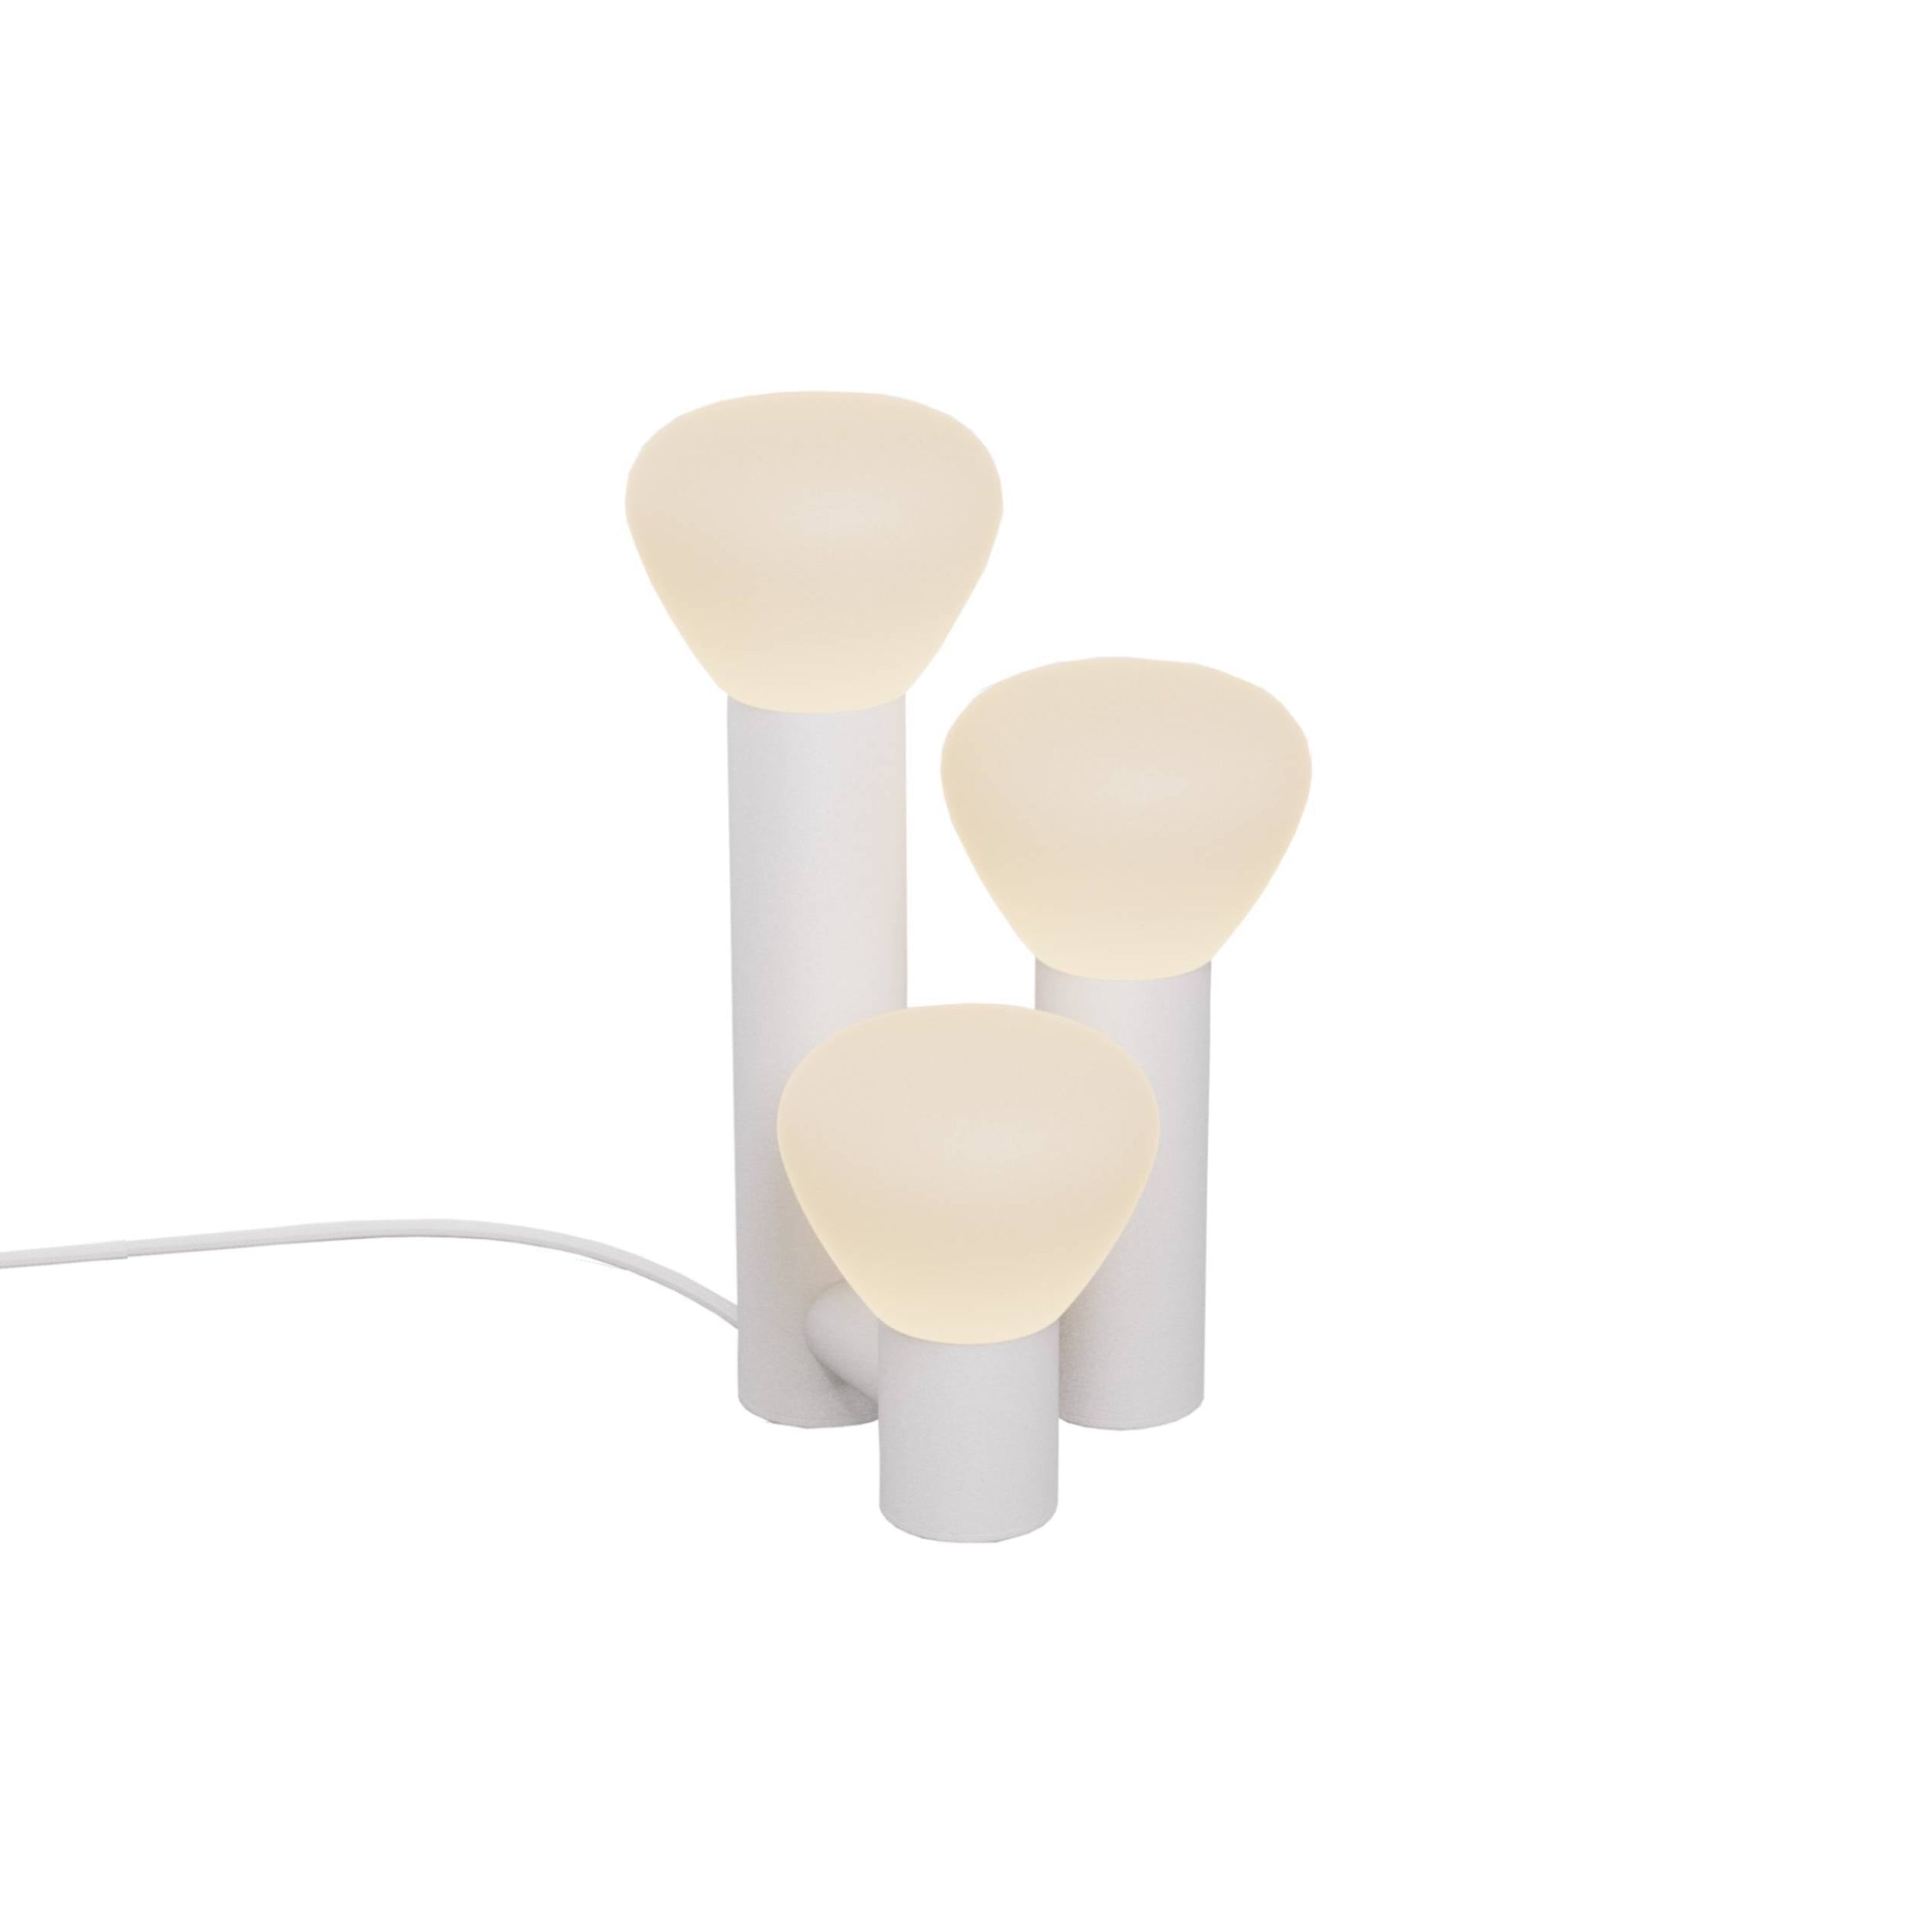 Parc 06 Table Lamp: Footswitch +  White + White